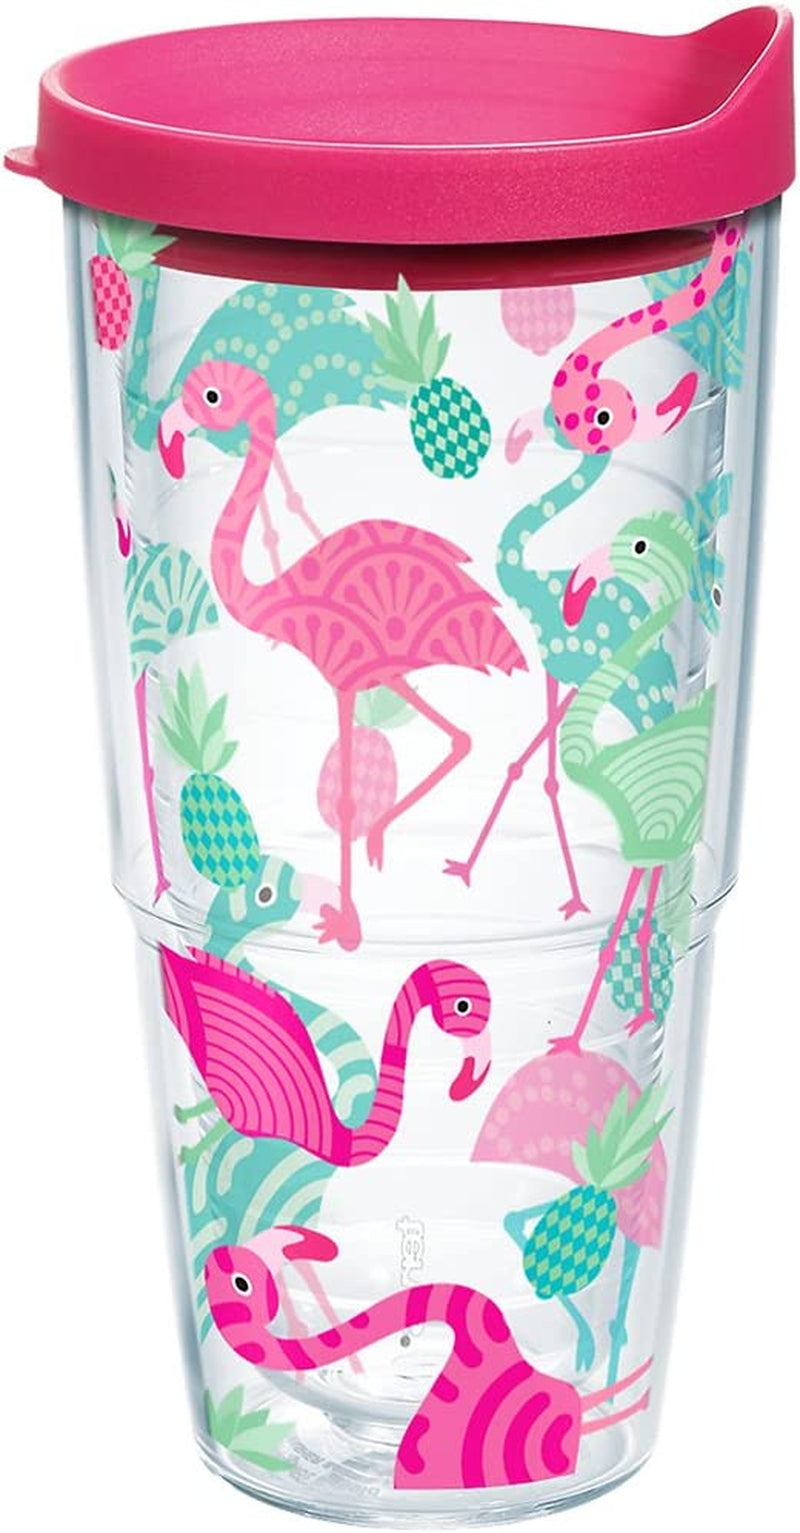 Tervis Flamingo Pattern Insulated Tumbler with Wrap and Fuschia Lid, 24 Oz, Clear Home & Garden > Kitchen & Dining > Tableware > Drinkware Tervis Classic 24 ounces (Tumbler) 